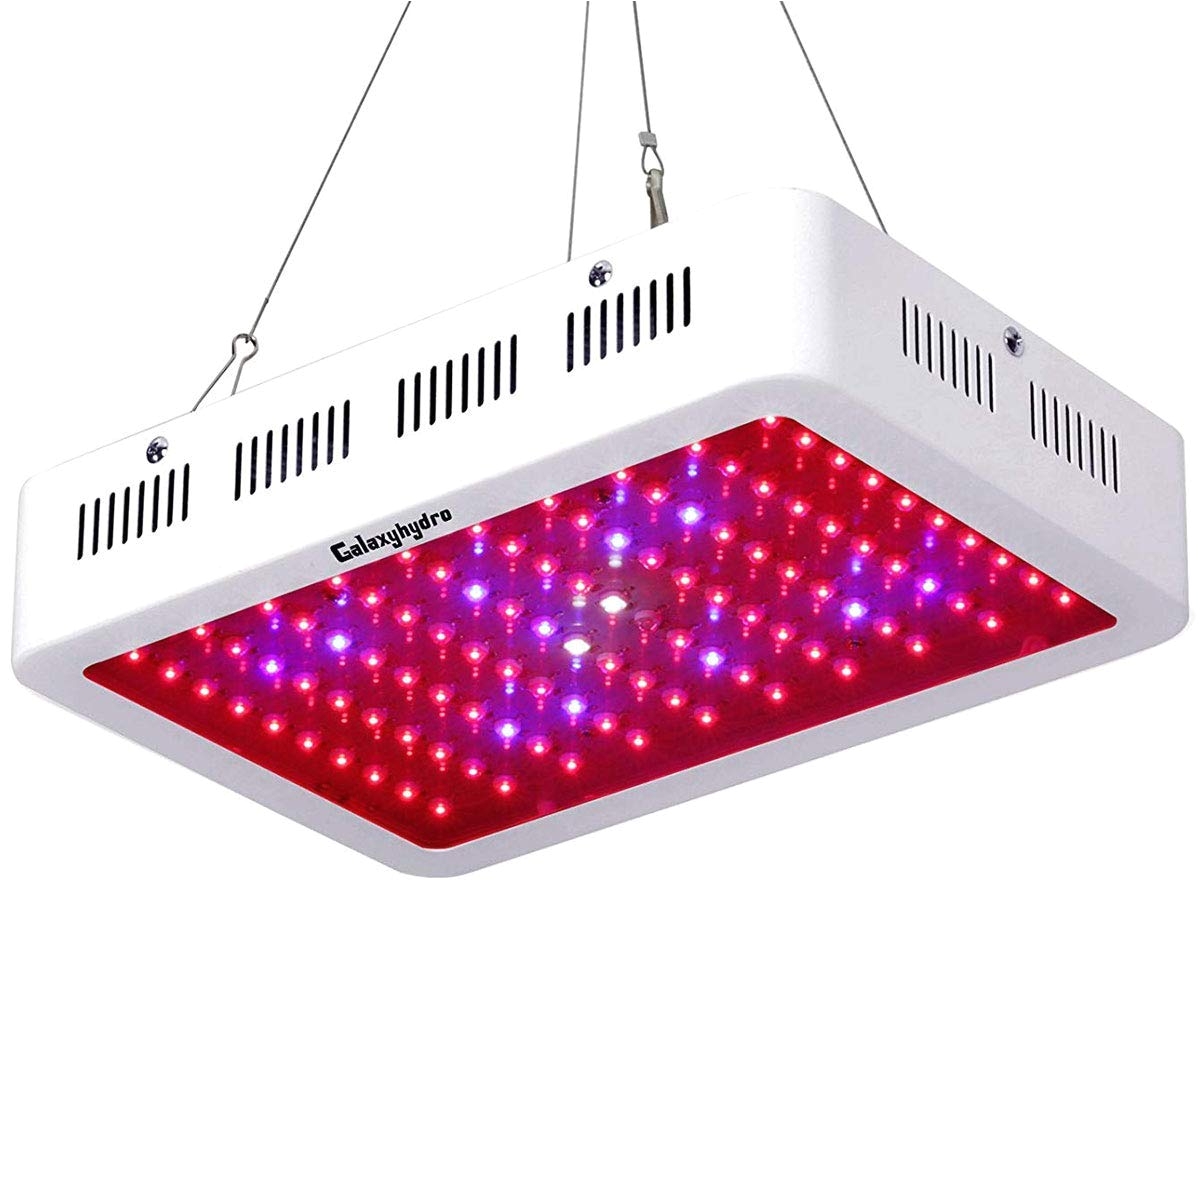 amazon com roleadro led grow light galaxyhydro series 300w indoor plant grow lights full spectrum with uvir for veg and flower garden outdoor